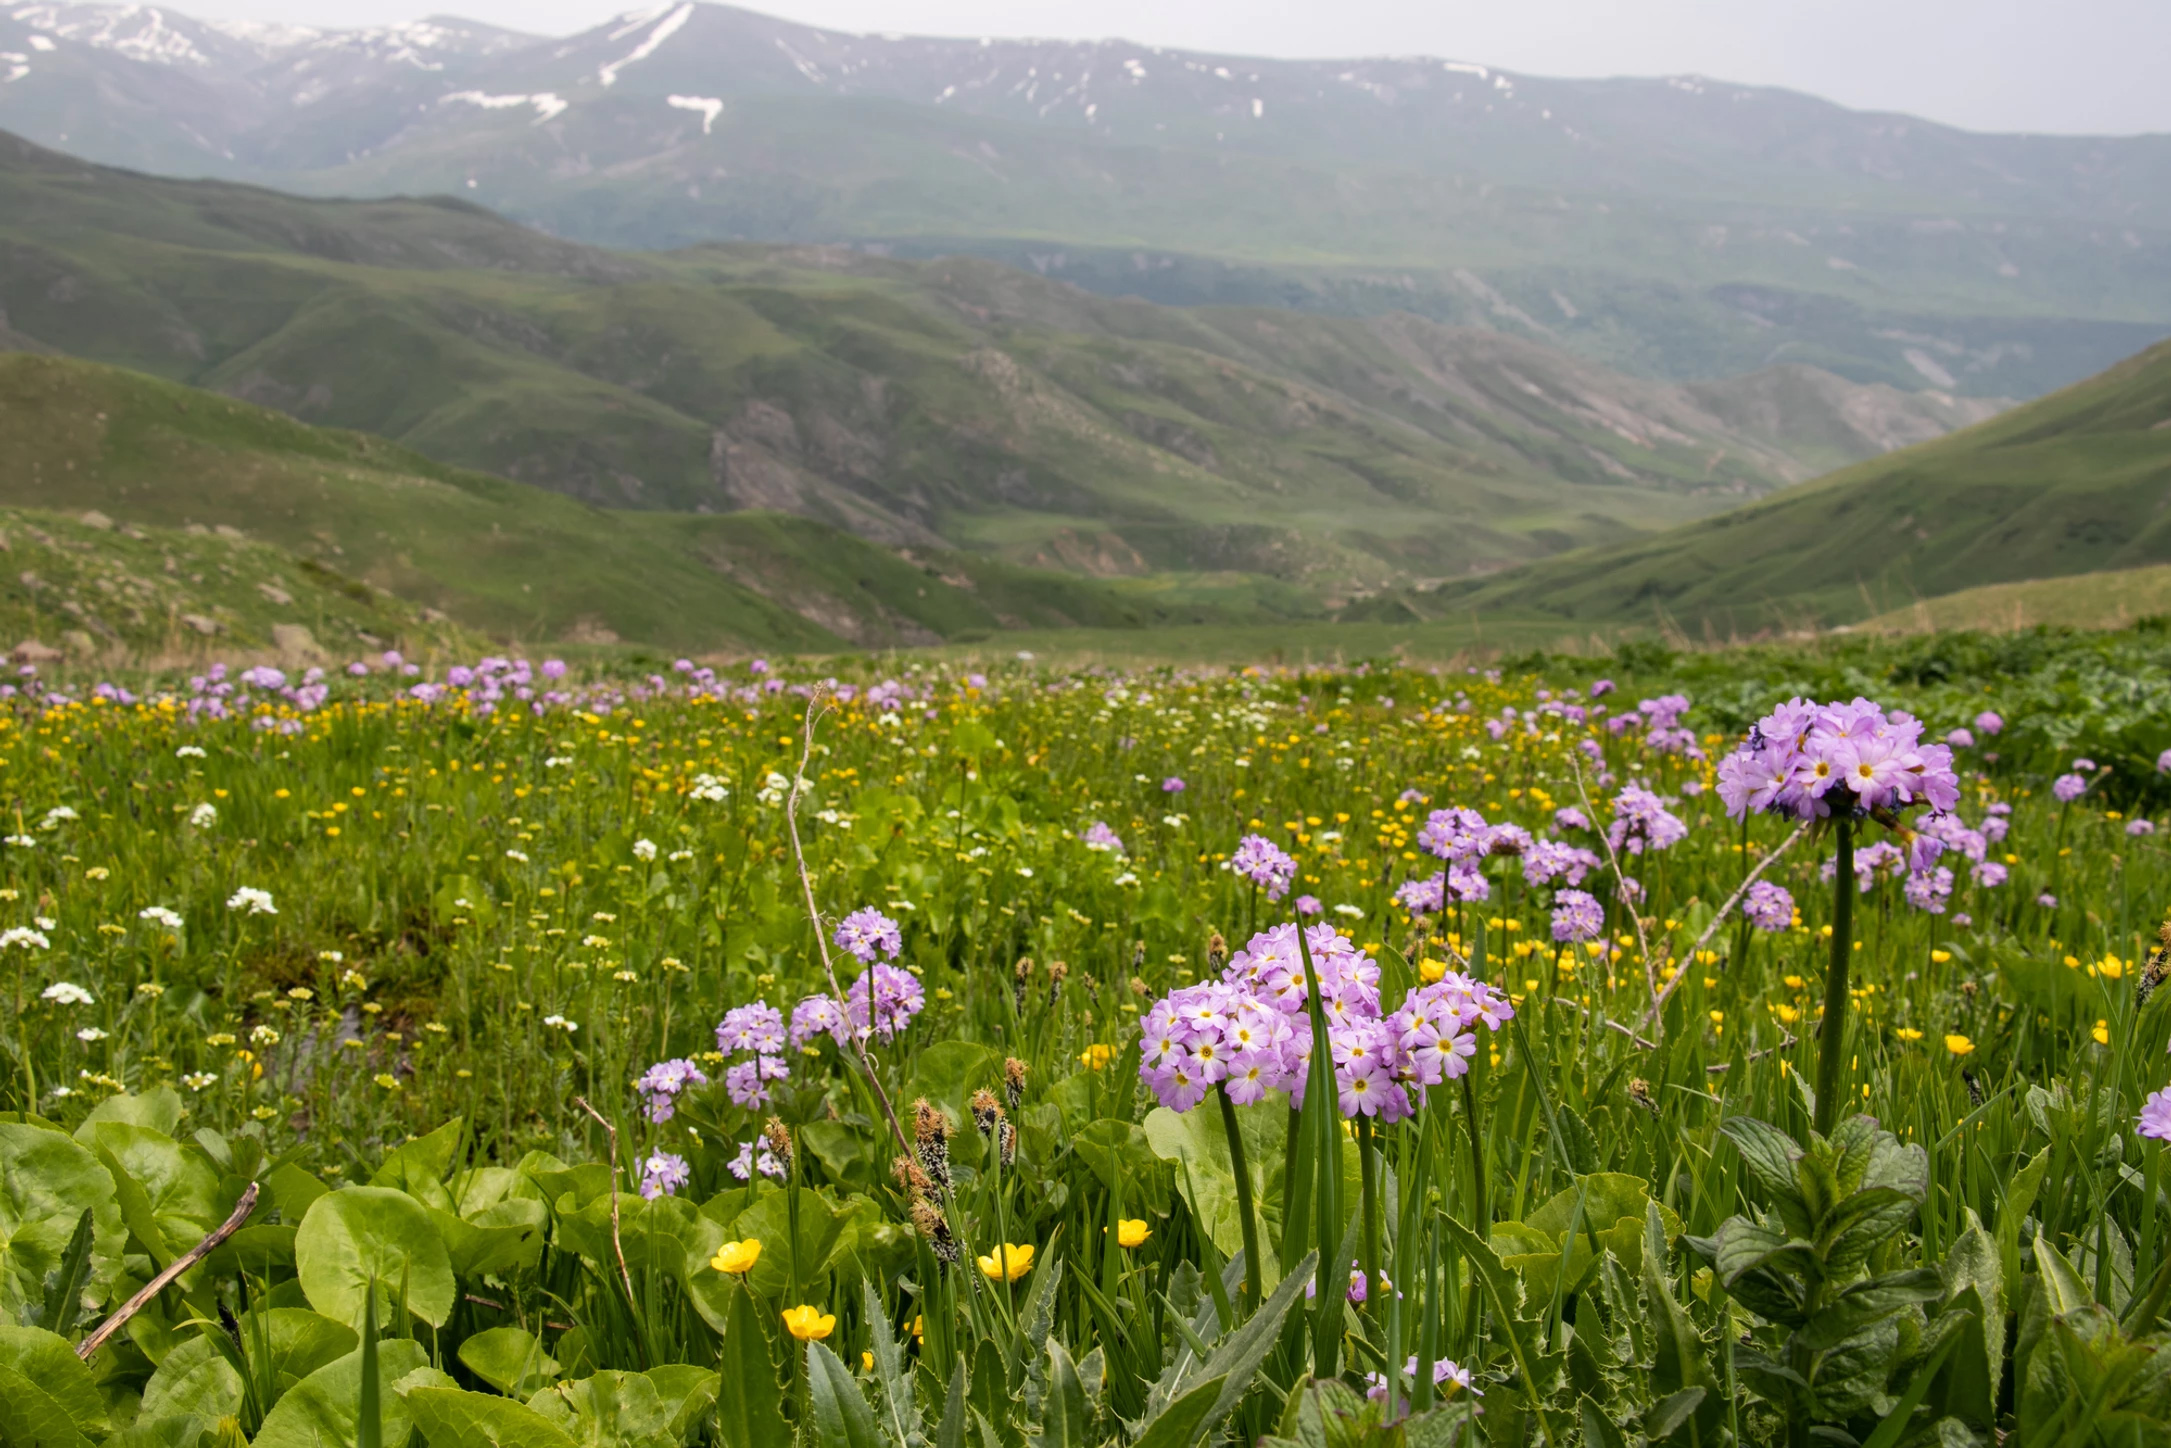 Primula denticulata Growing in a mountain valley in Armenia, with Ranunculus and AchilleaPrimula denticulata Growing in a mountain valley in Armenia, with Ranunculus and Achillea